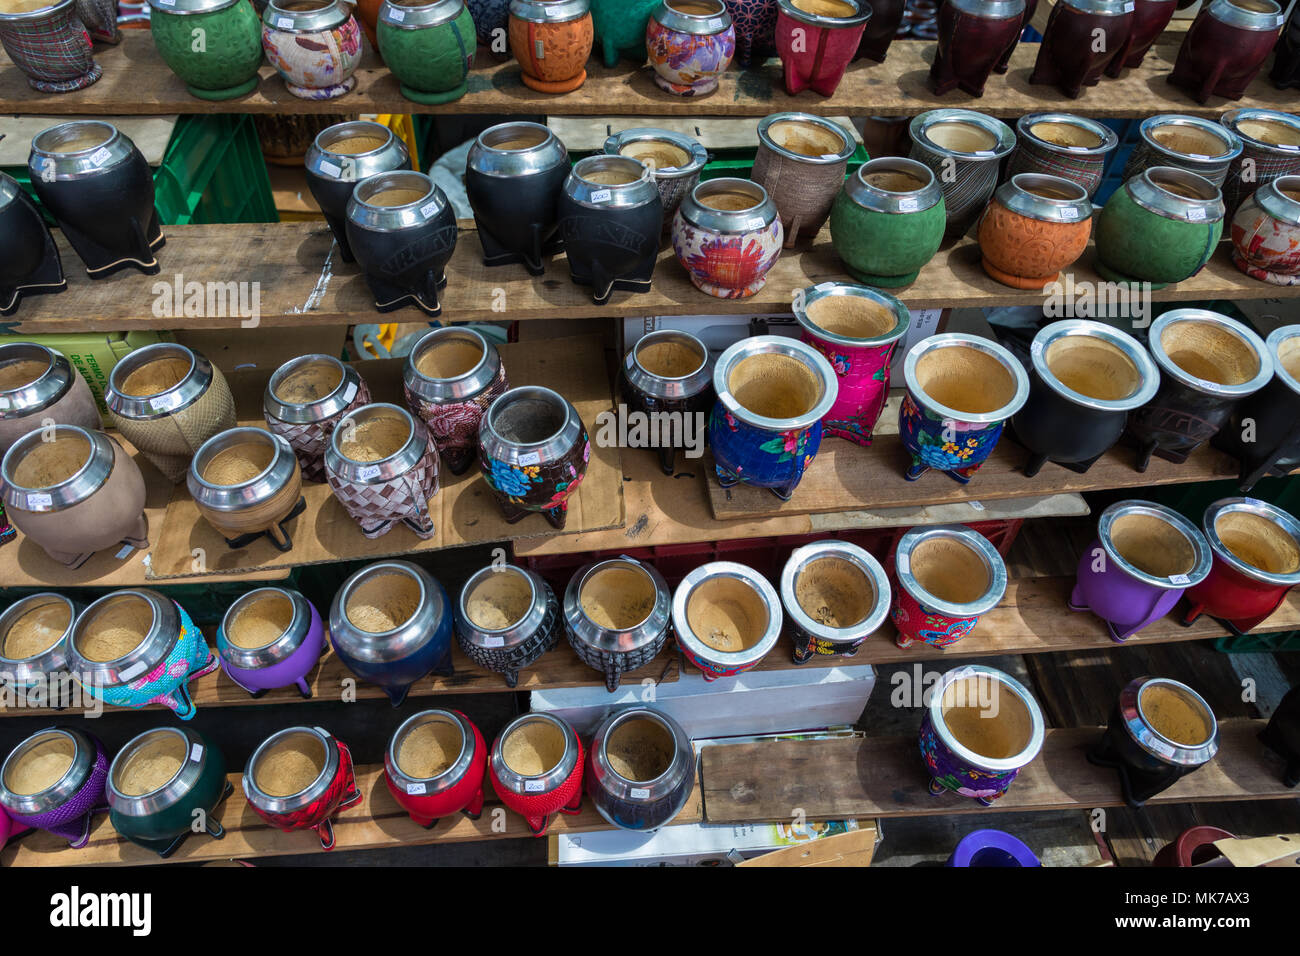 Mate gourds for sale as popular souvenirs from Argentina and Uruguay. Stock Photo